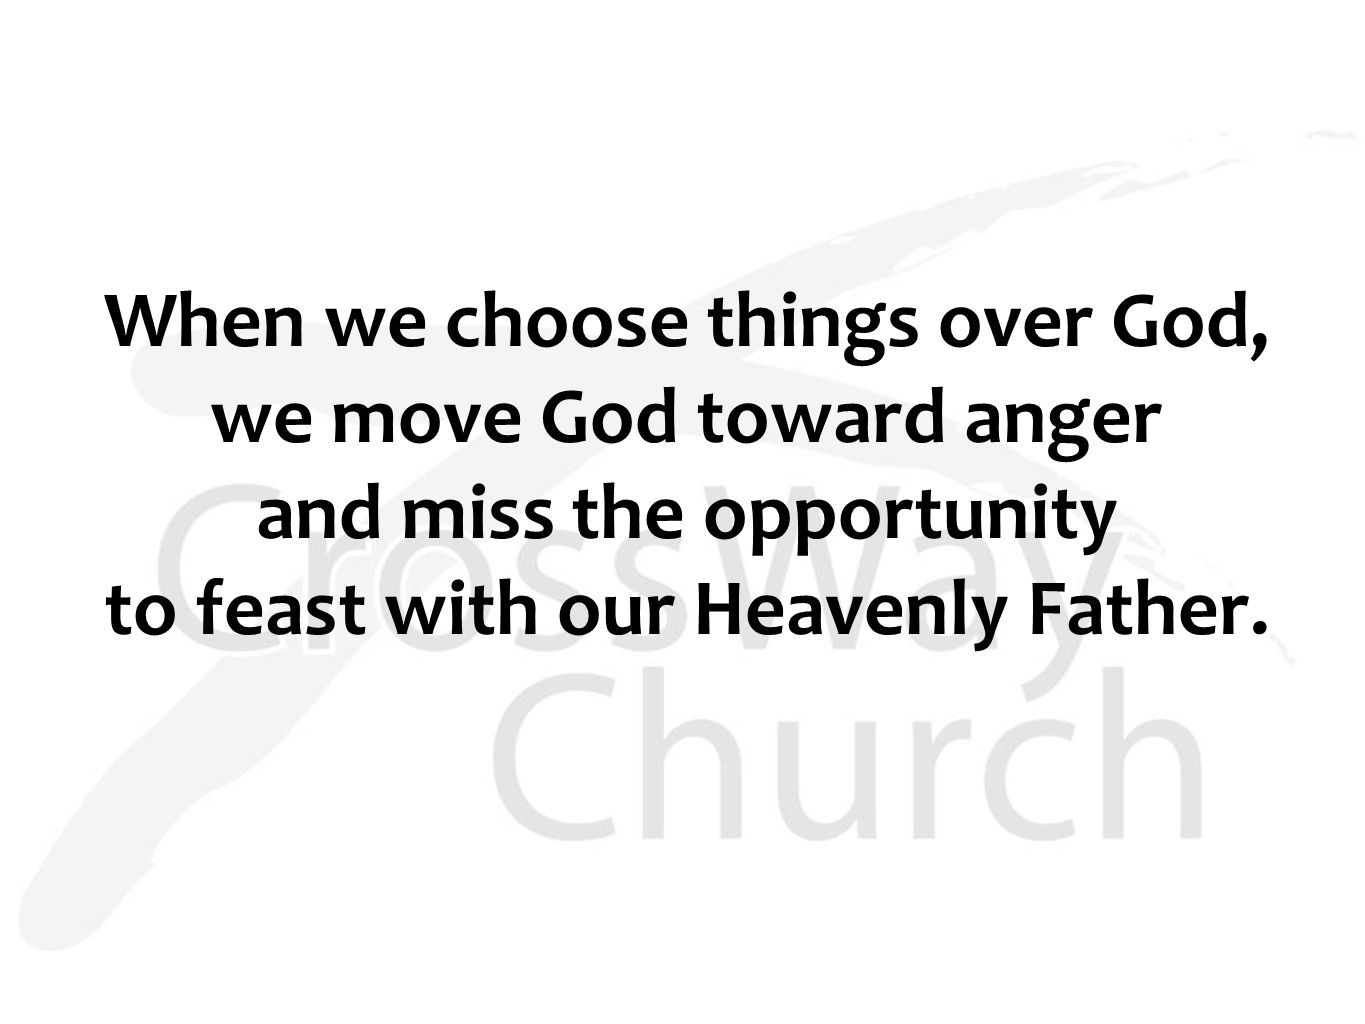 When we choose things over God, we move God toward anger and miss the opportunity to feast with our Heavenly Father.